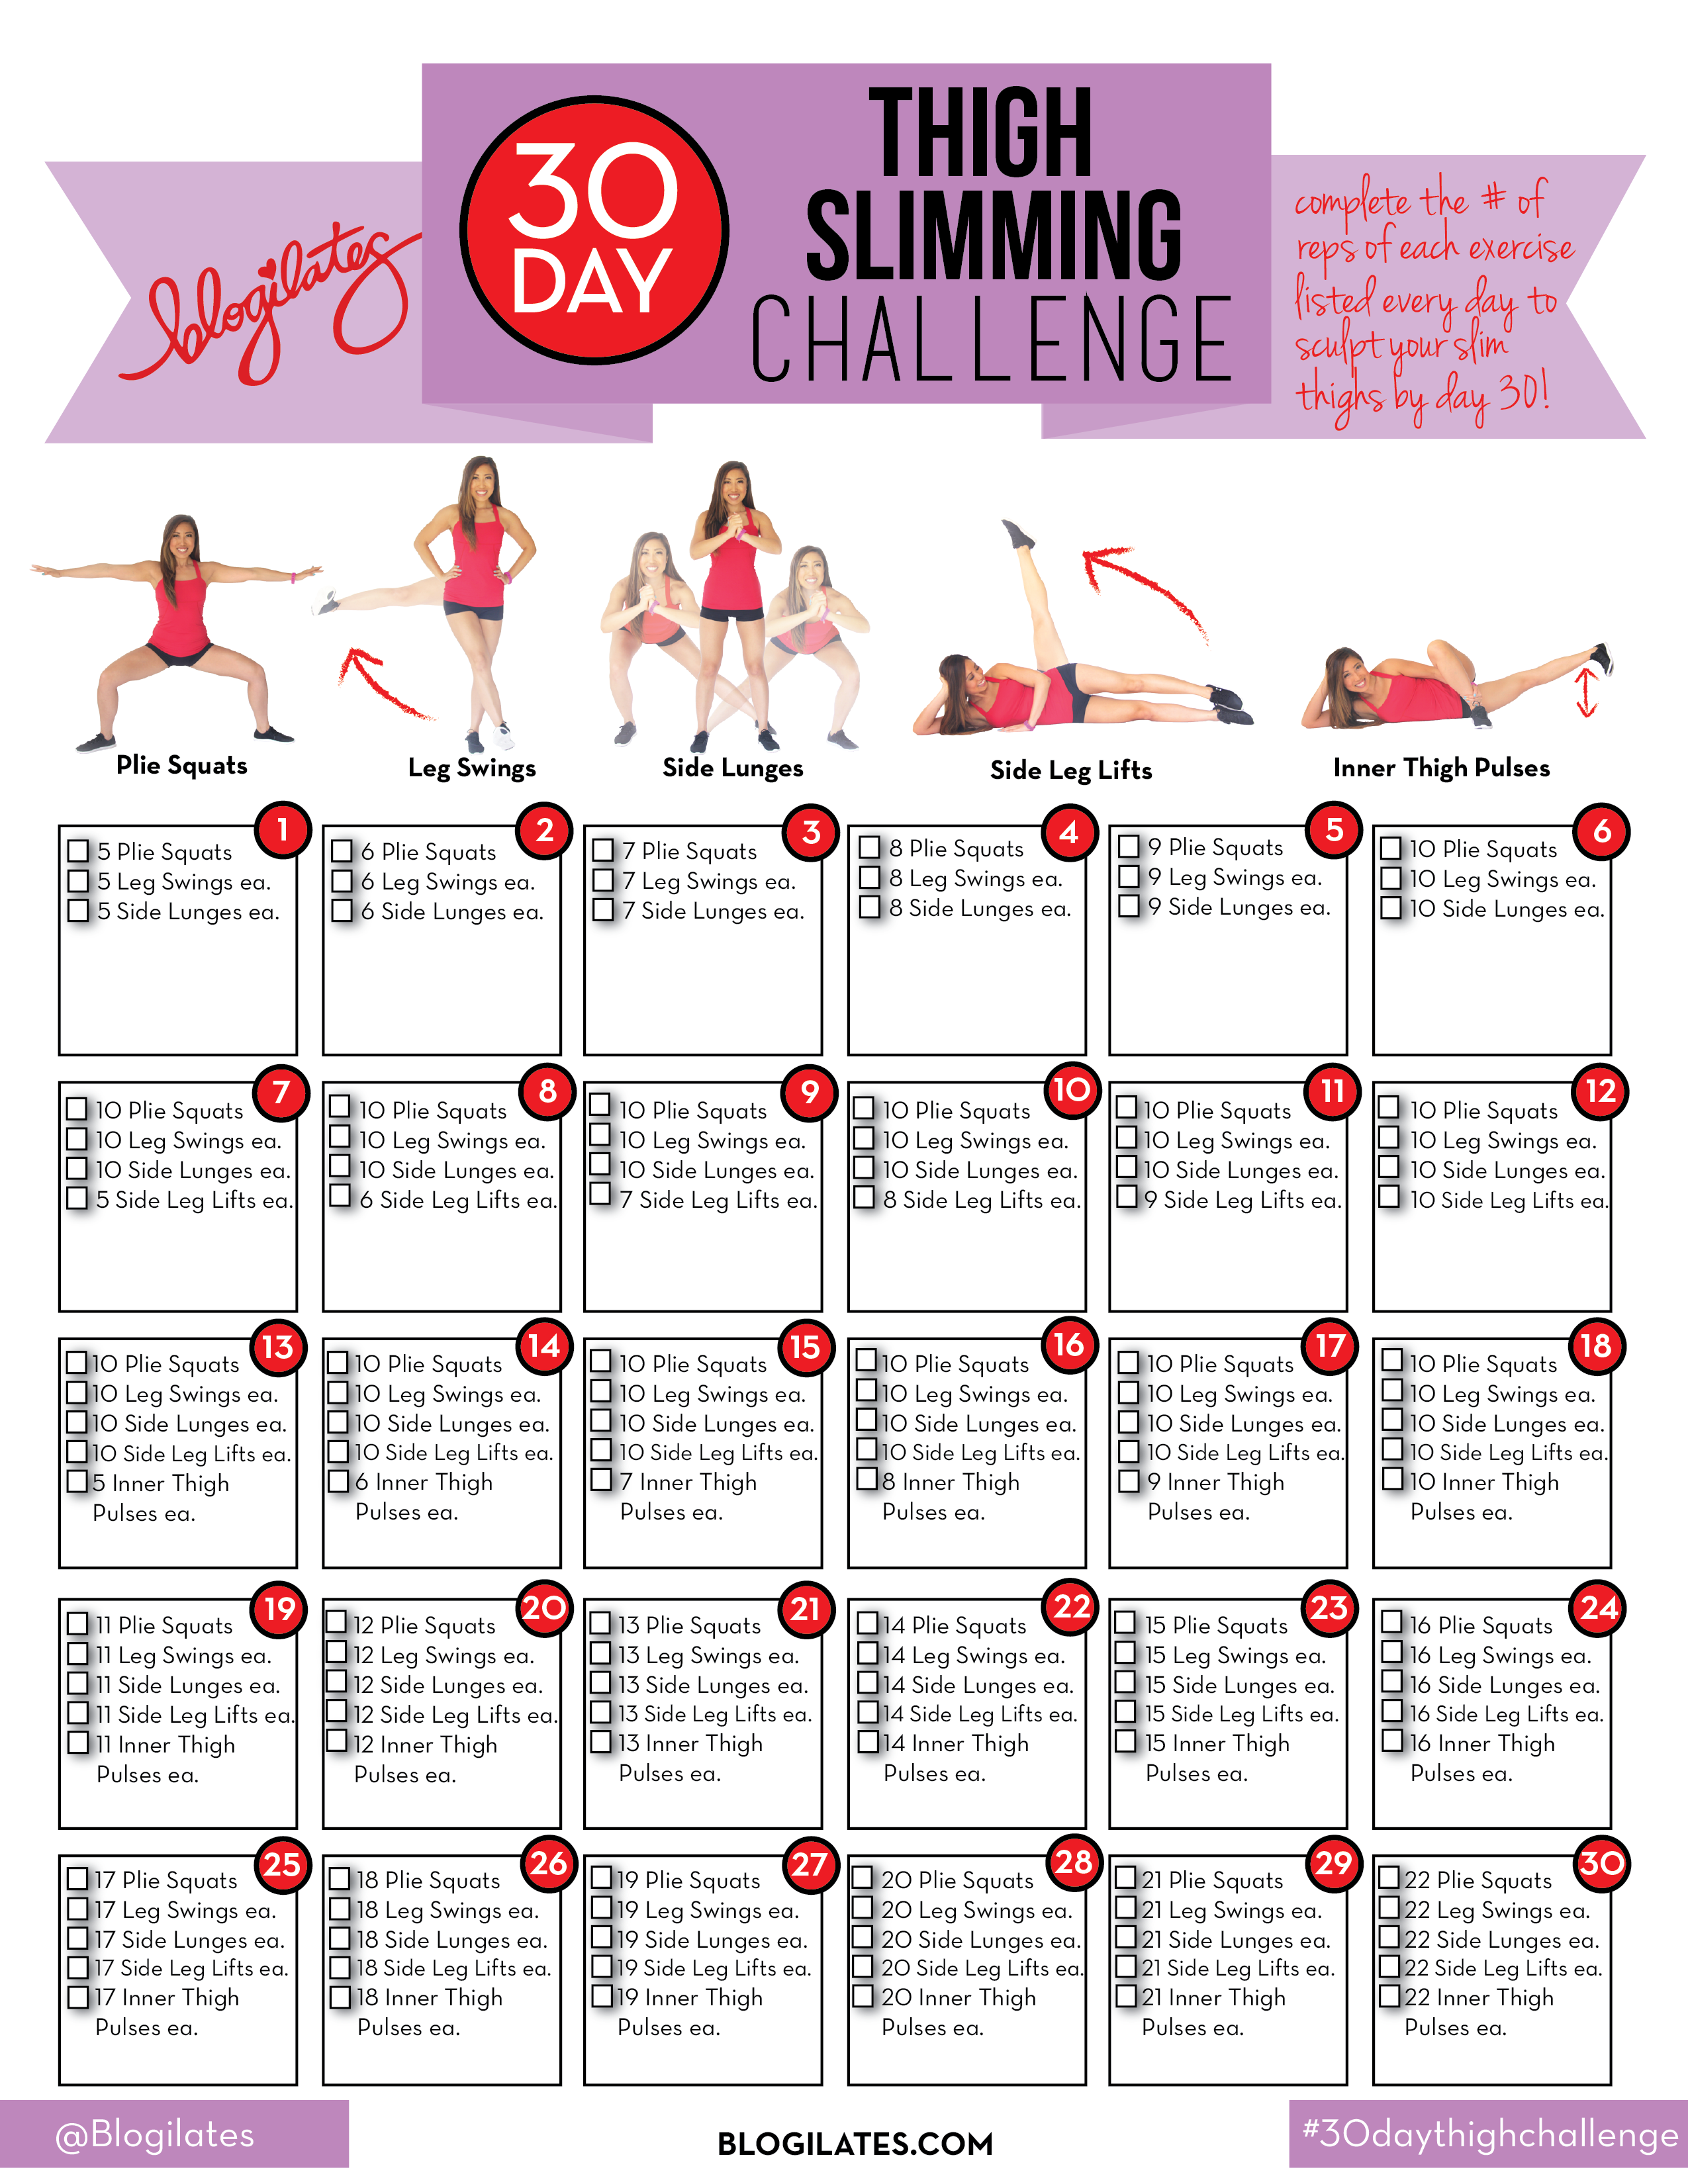 http://www.blogilates.com/wp-content/uploads/2015/02/30-day-thigh-slimming-challenge.png